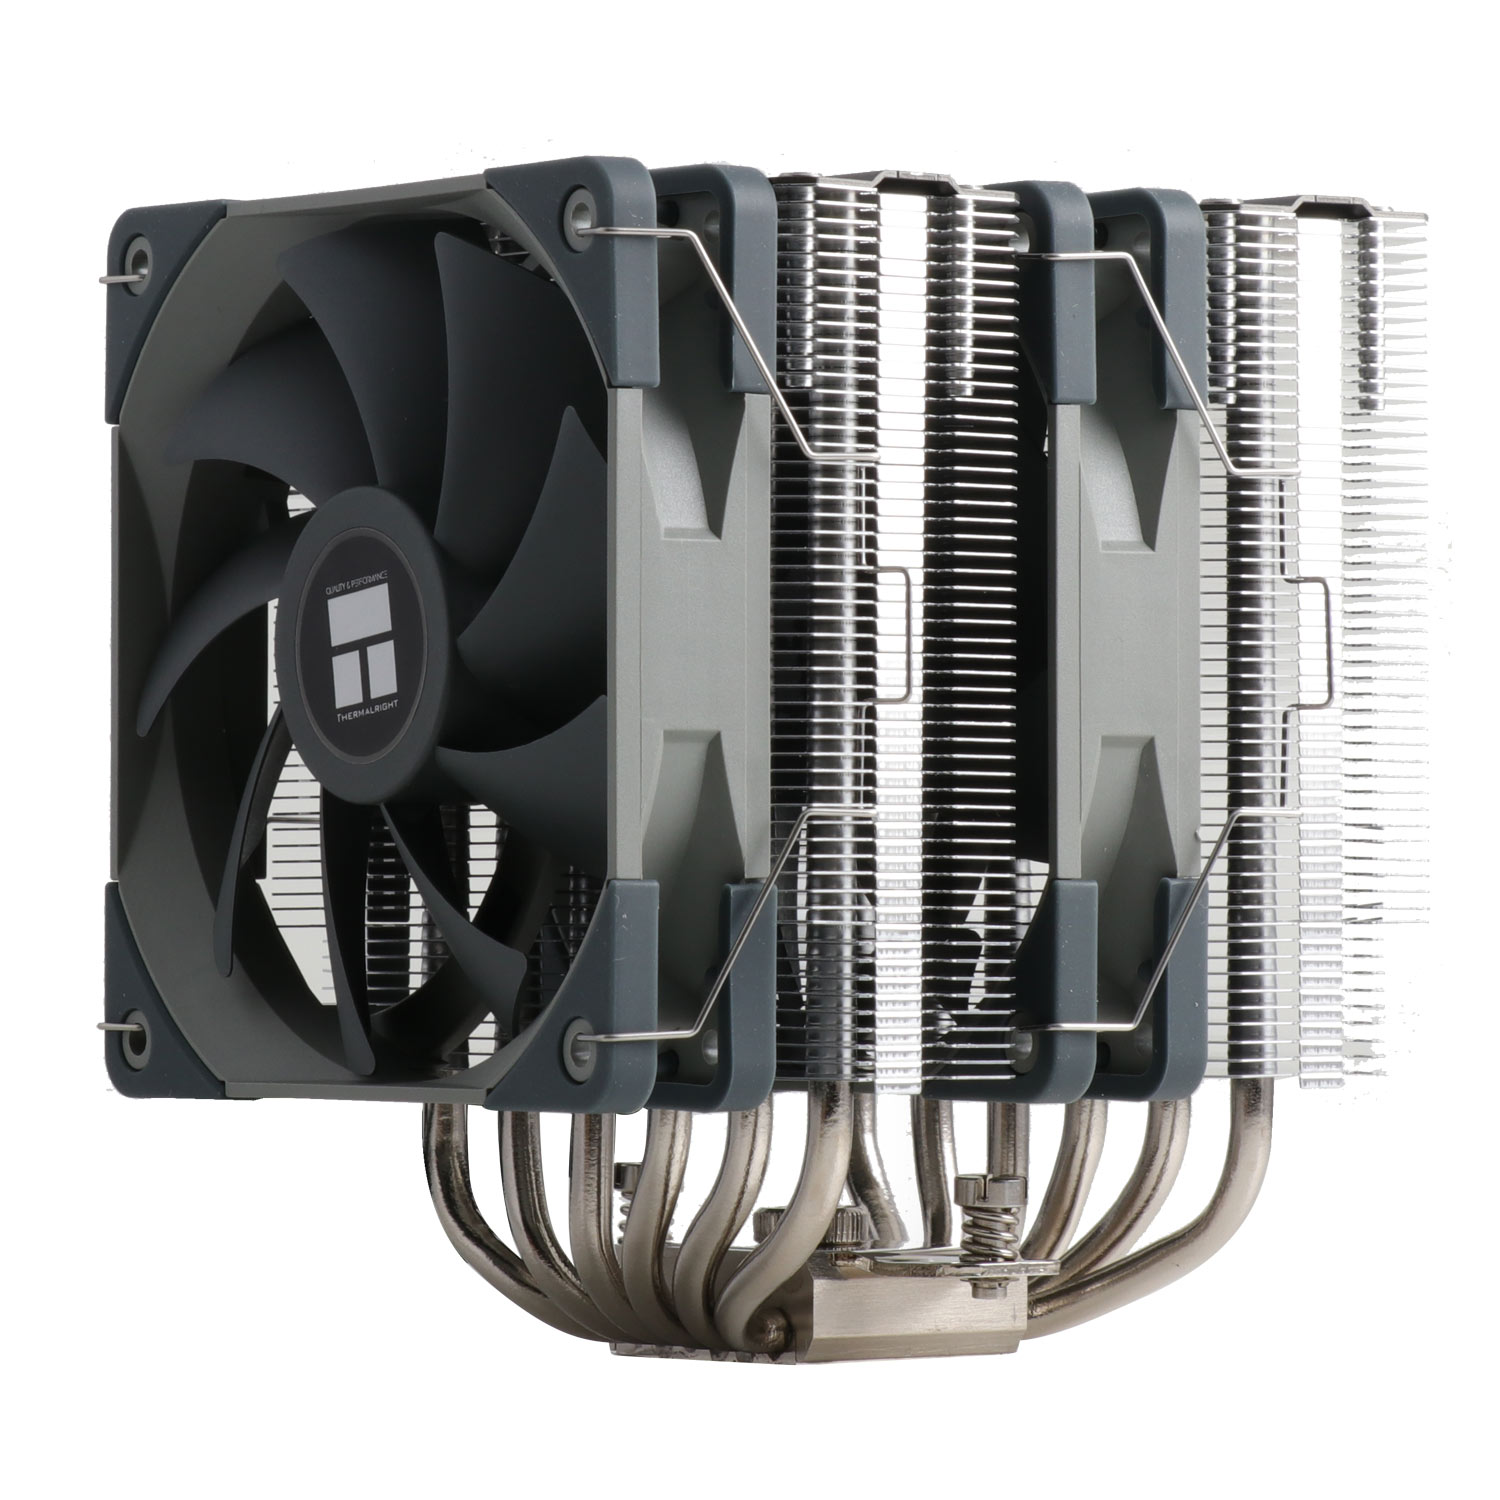 Qoo10 - Thermalright Peerless Assassin 120 SE ARGB CPU Air Cooler for AMD  AM4/ : Computer & Games